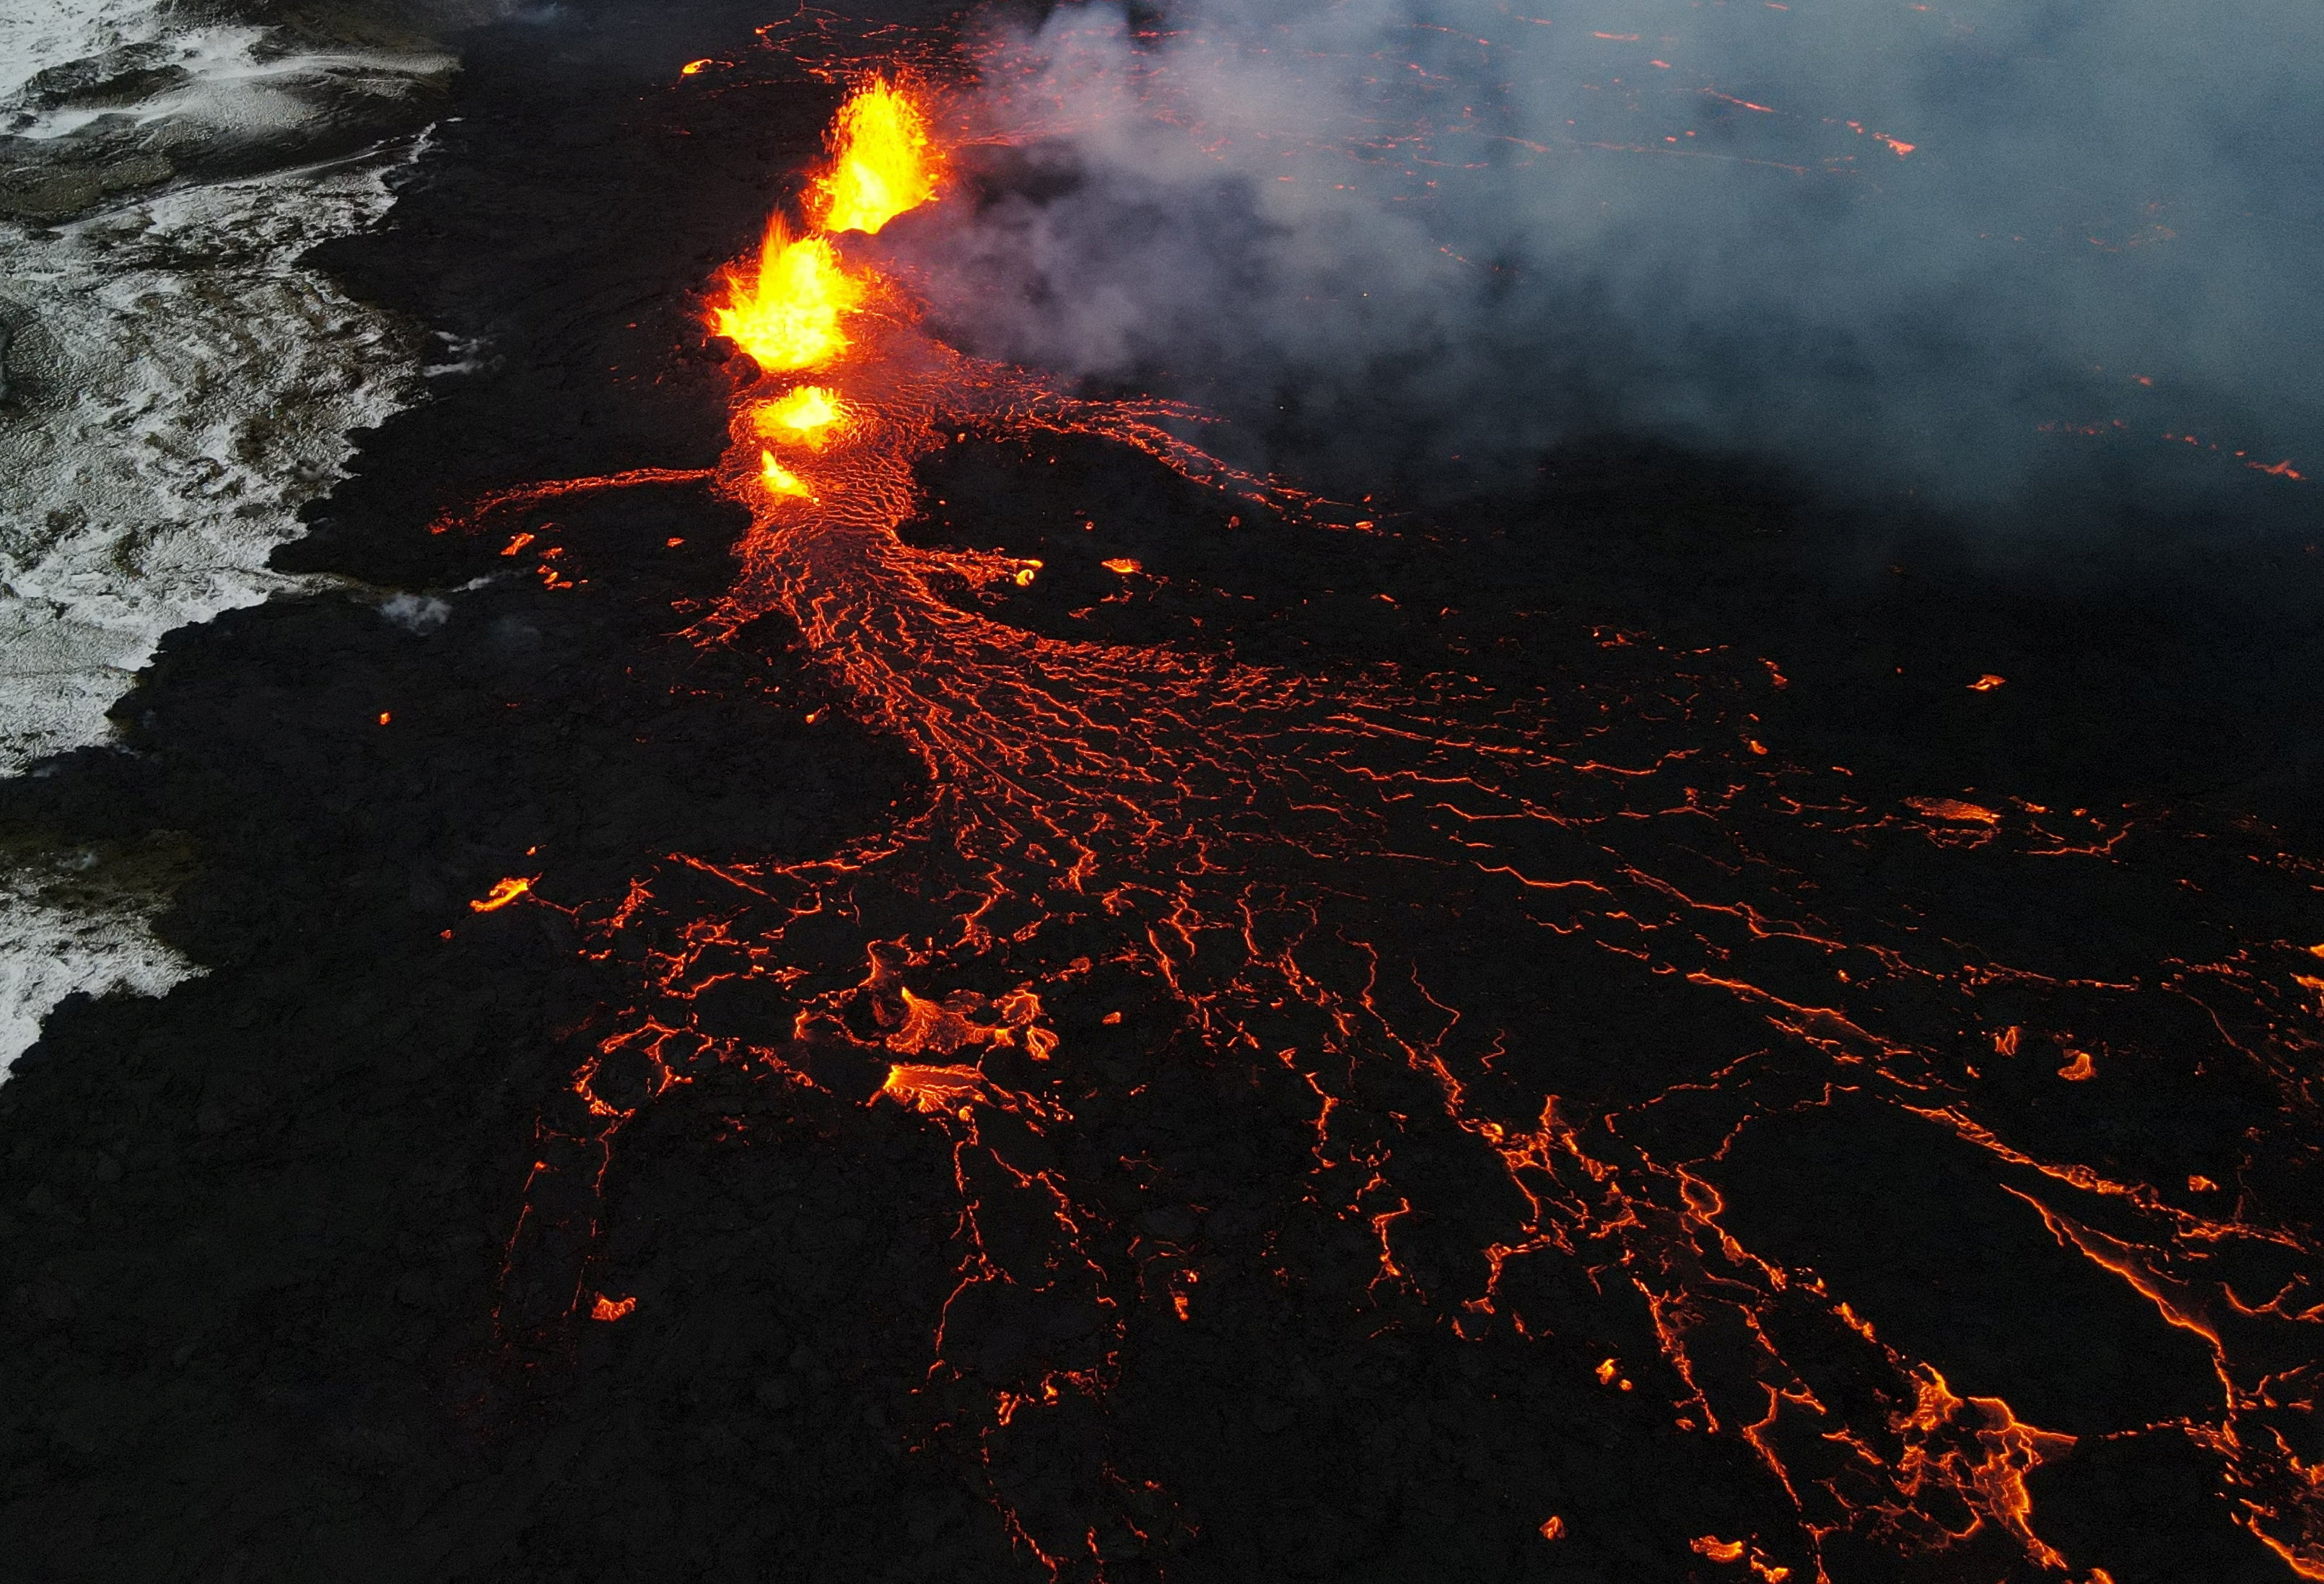 An aerial view of lava spewing from the site of the volcanic eruption north of Grindavik